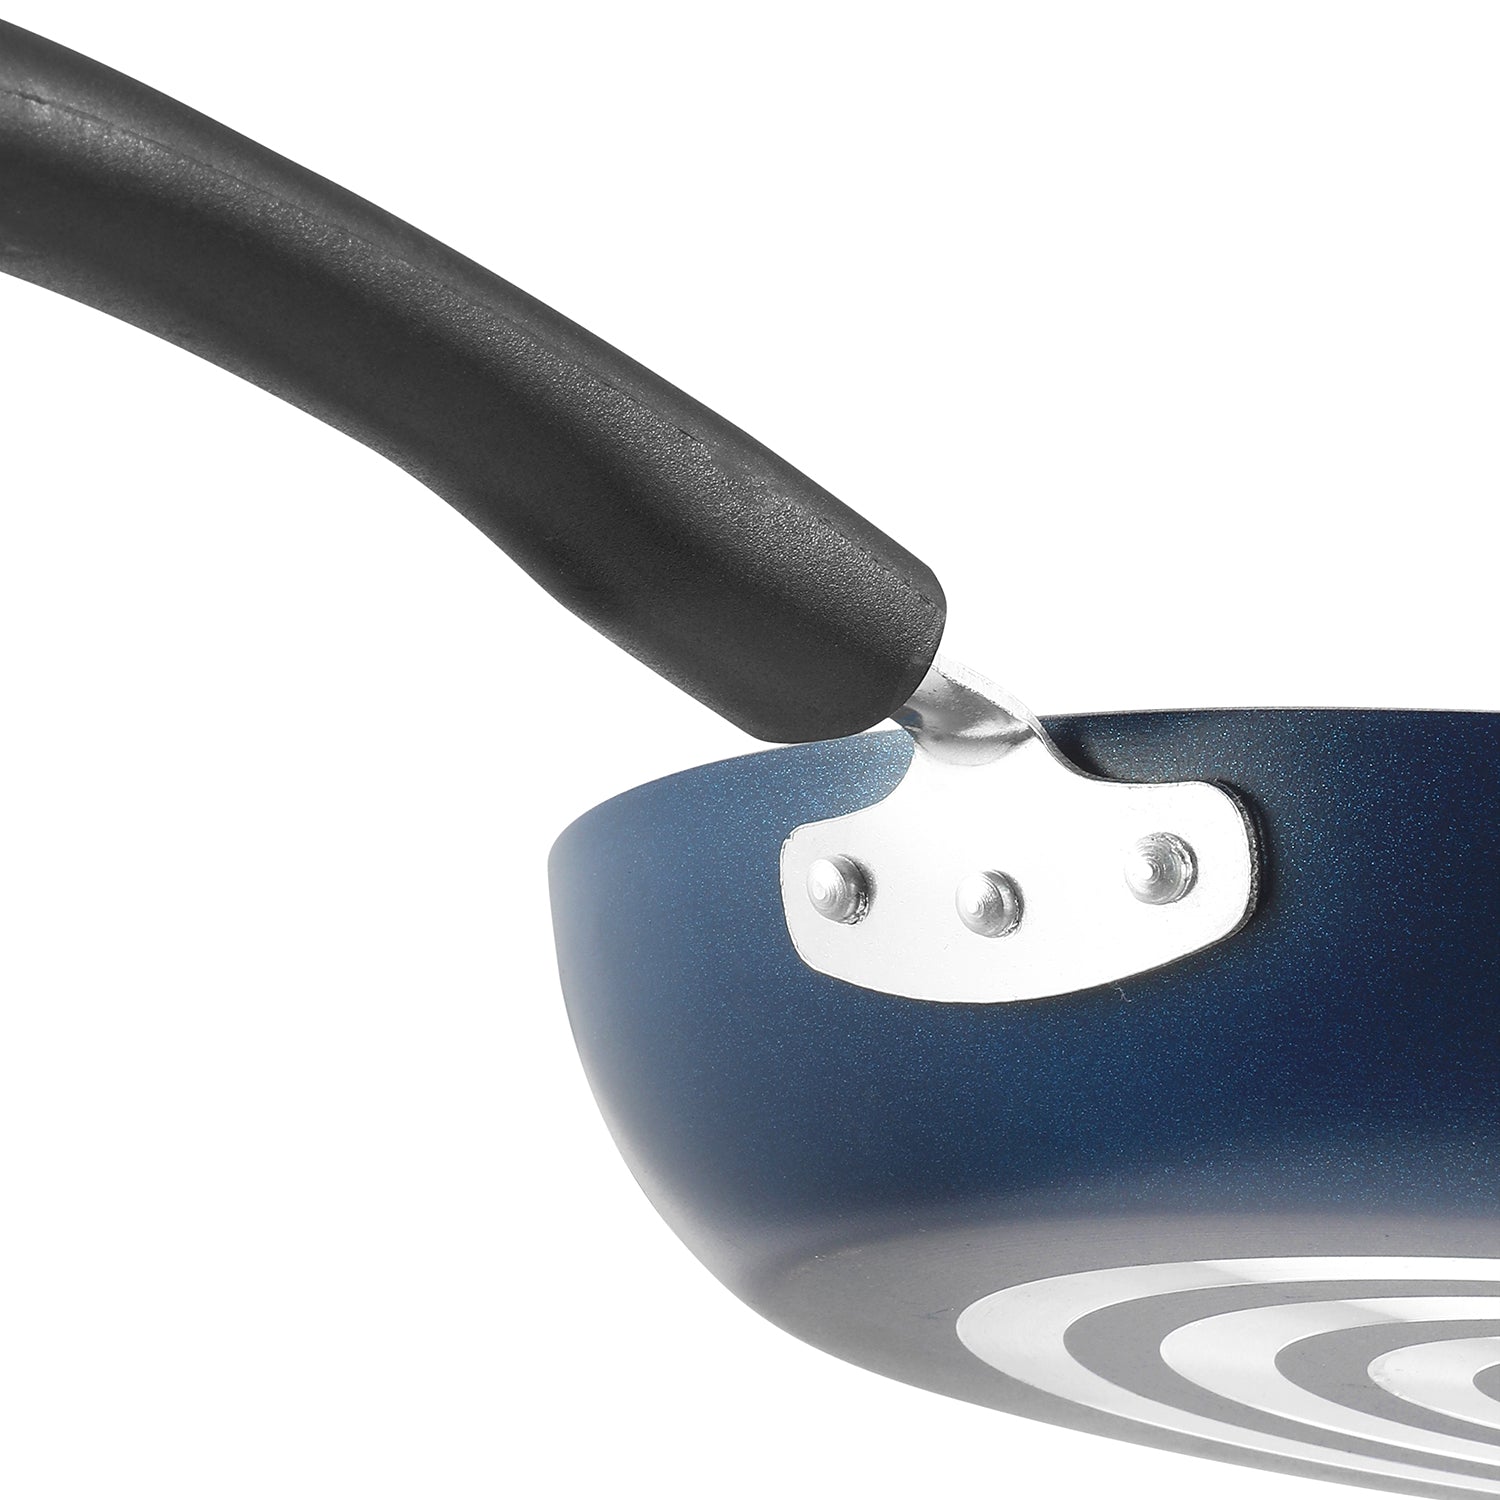 Sturdy and Durable Triple Riveted Handle of Non Stick Fry Pan